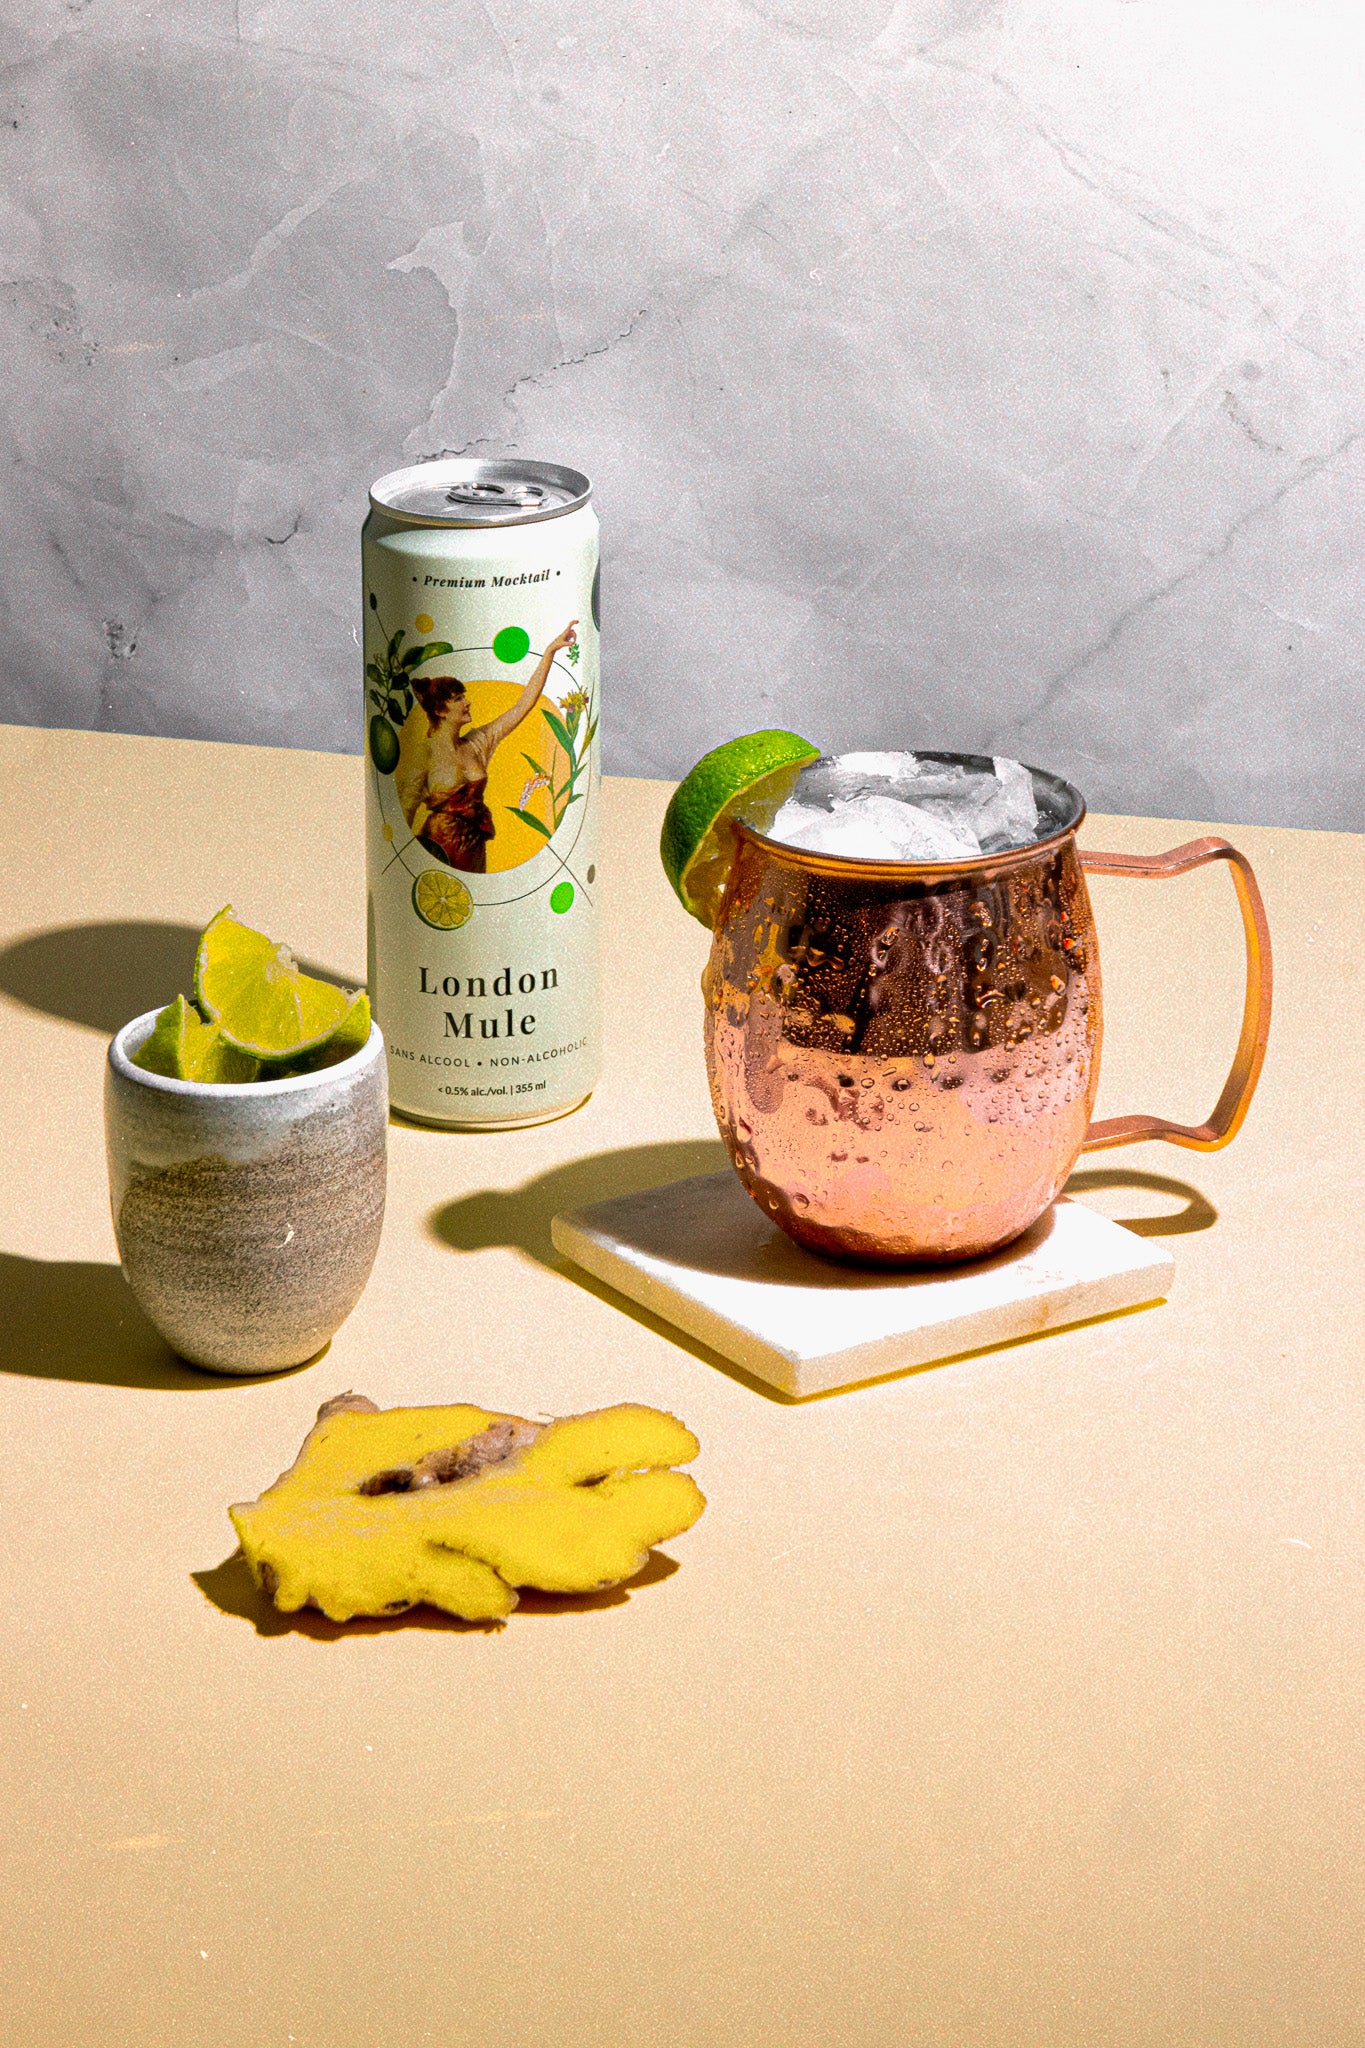 Mixed pack (London Mule and Tonic Water)